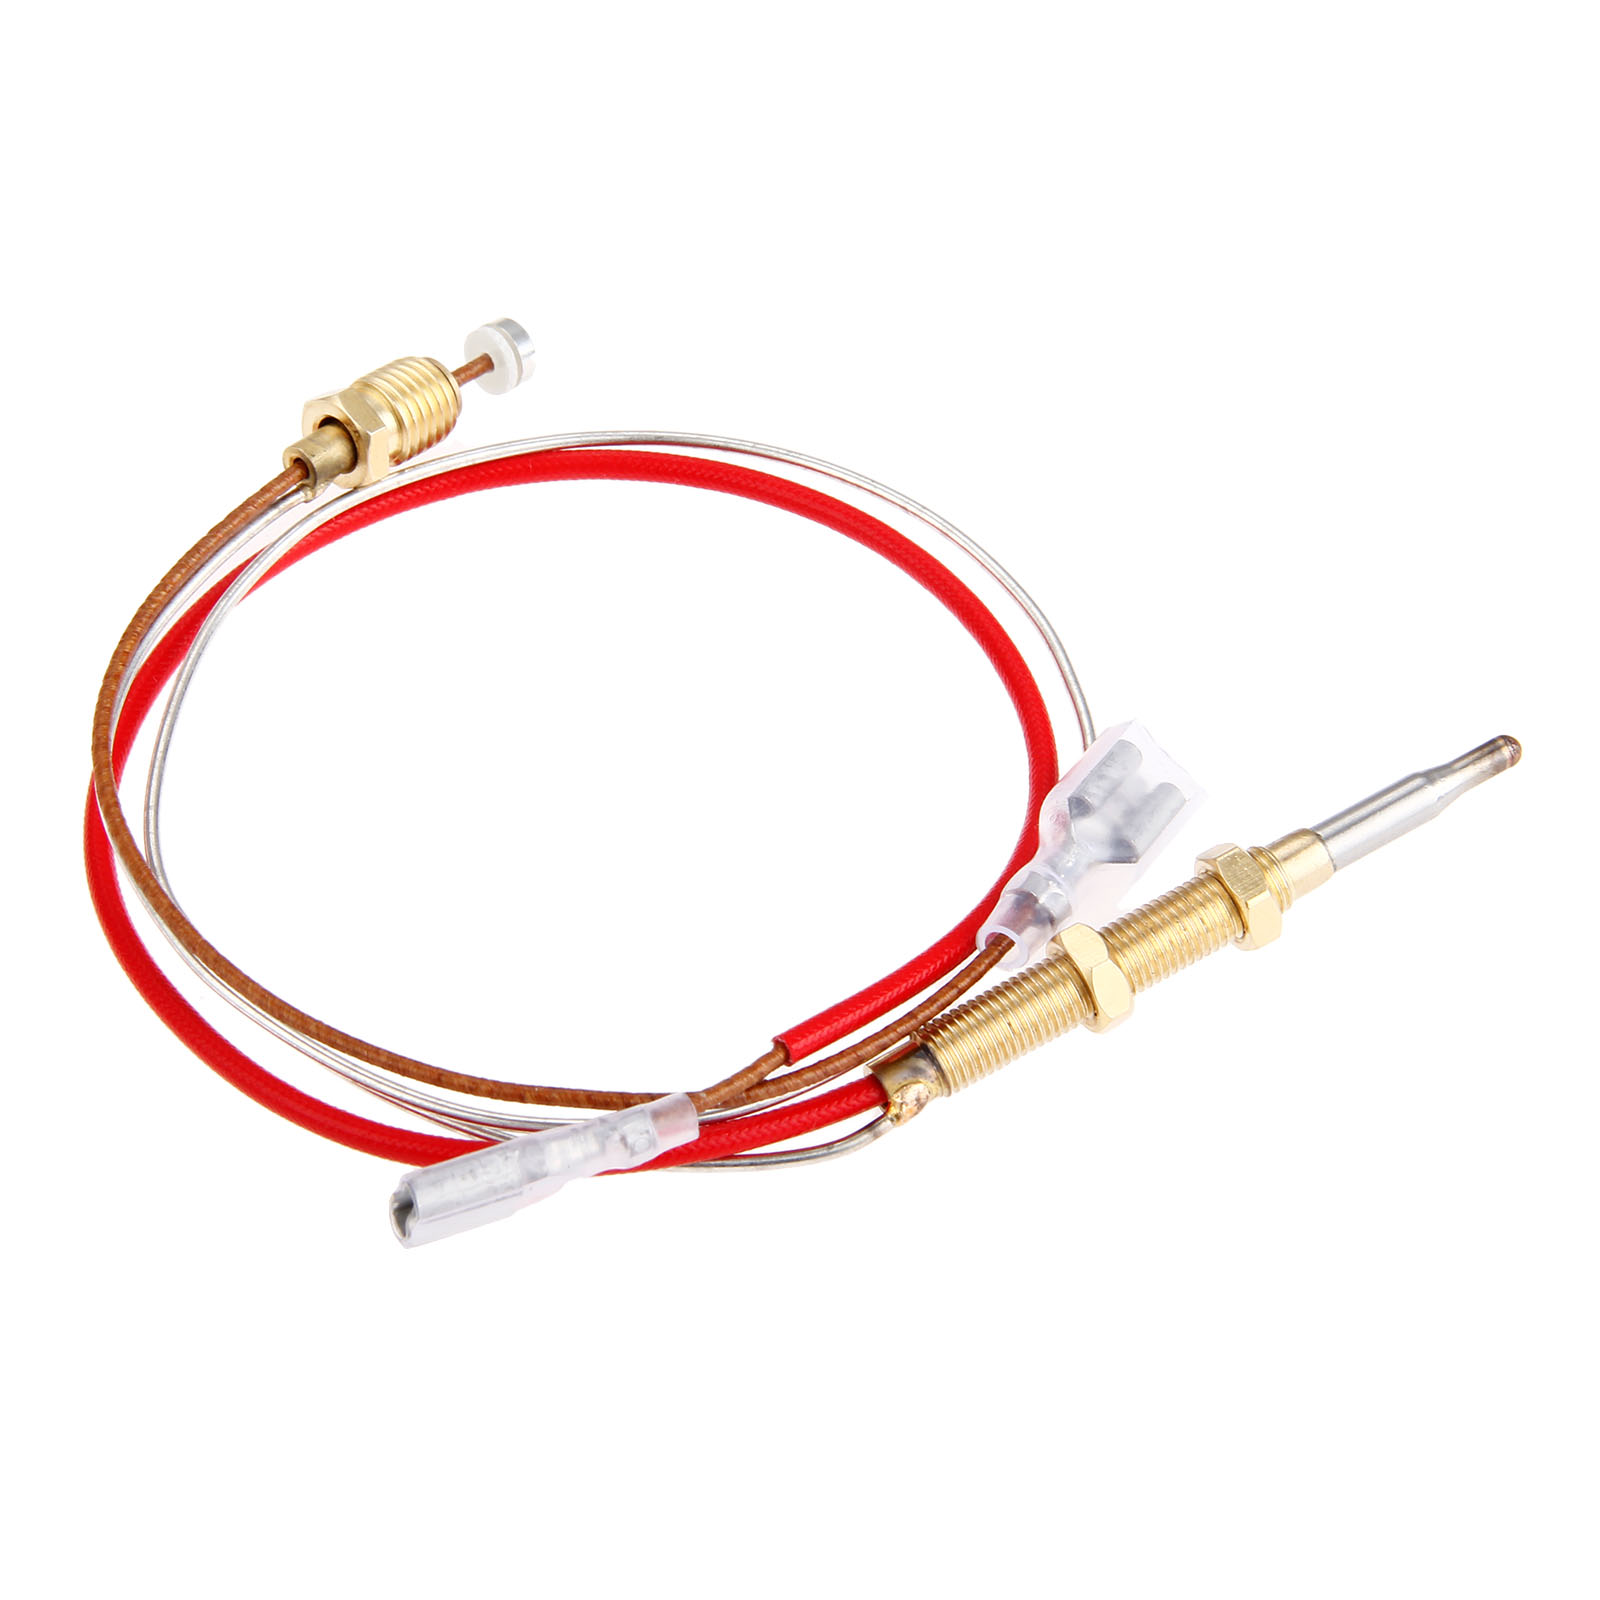 1 Pc 410mm Universal Thermocouple for Outdoor Gas Patio Heater M6*0.75 Thread on Head M8x1 End Connection Fireplace Stoves Parts